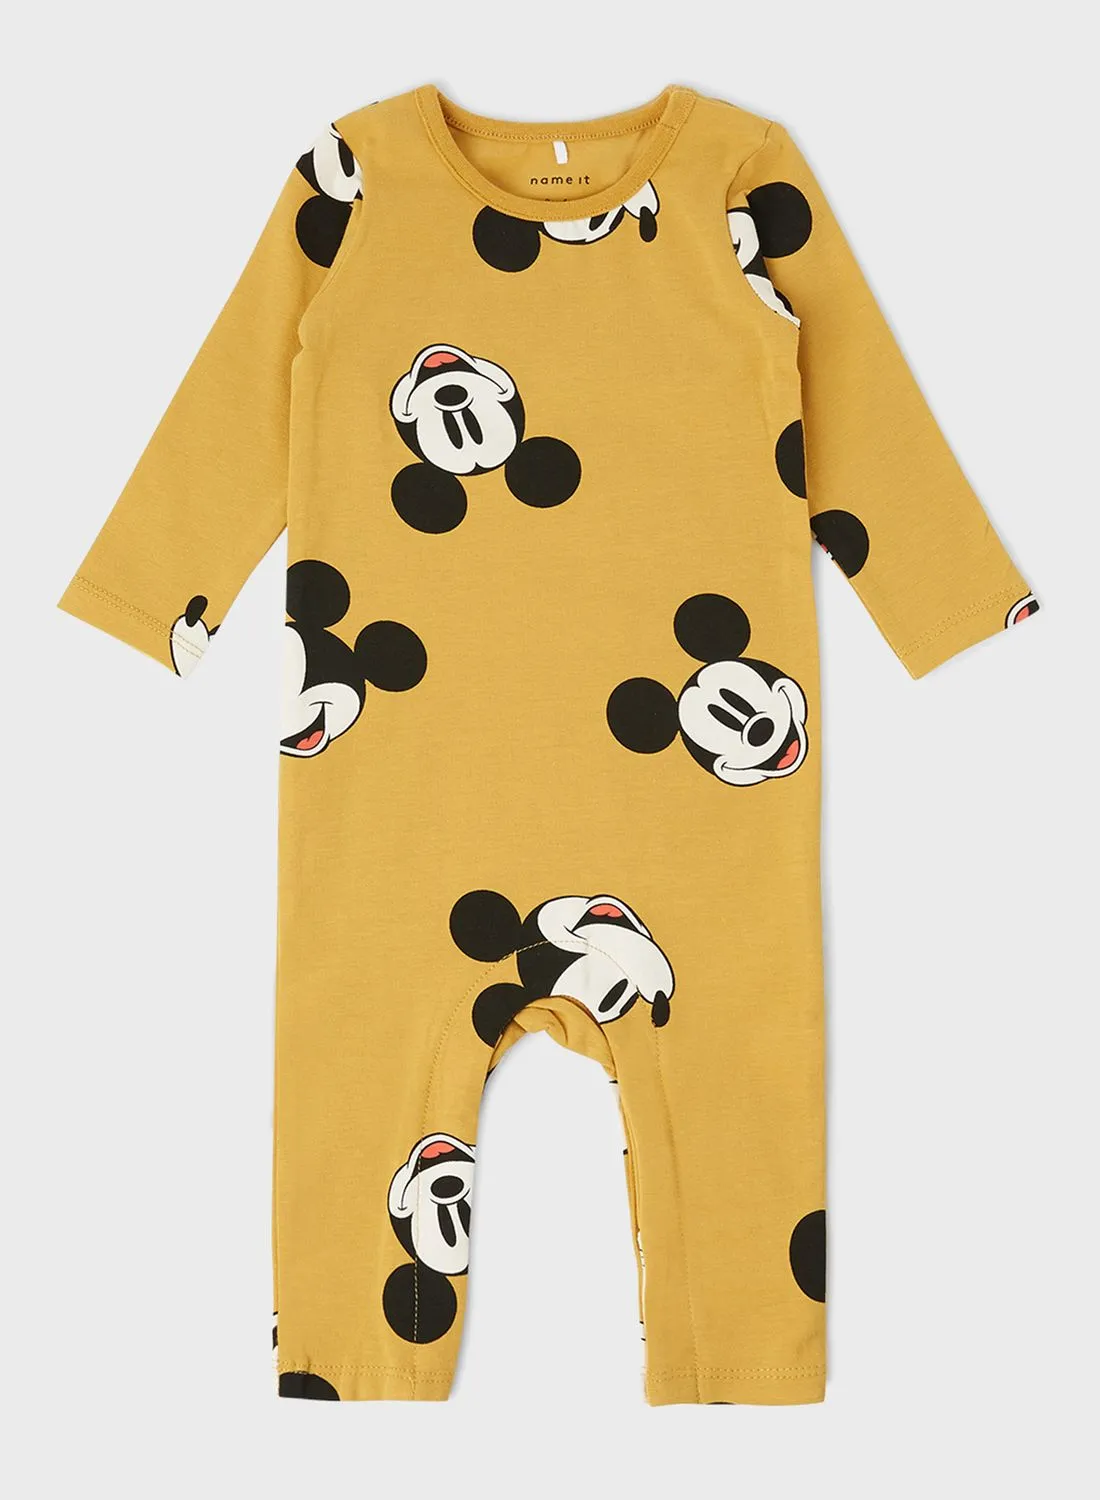 NAME IT Kids Mickey Mouse Overalls